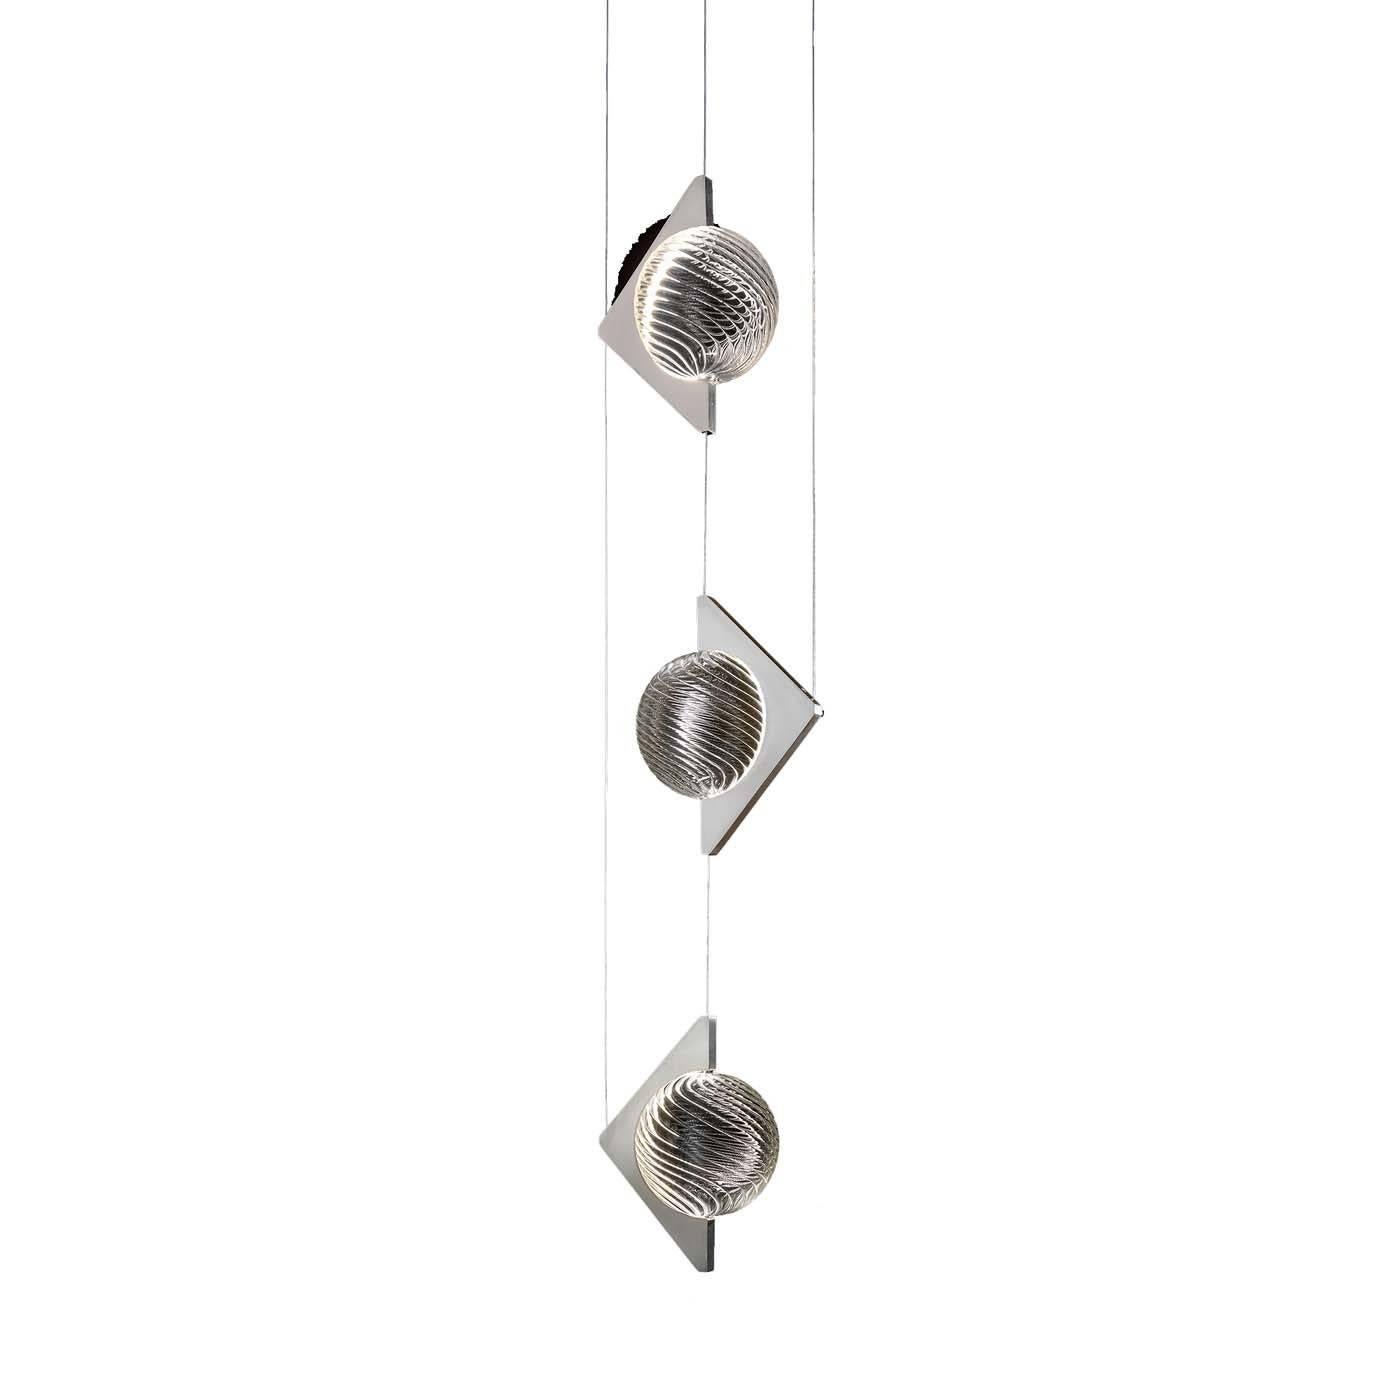 Oz Three-Element Stainless Steel Ceiling Lamp